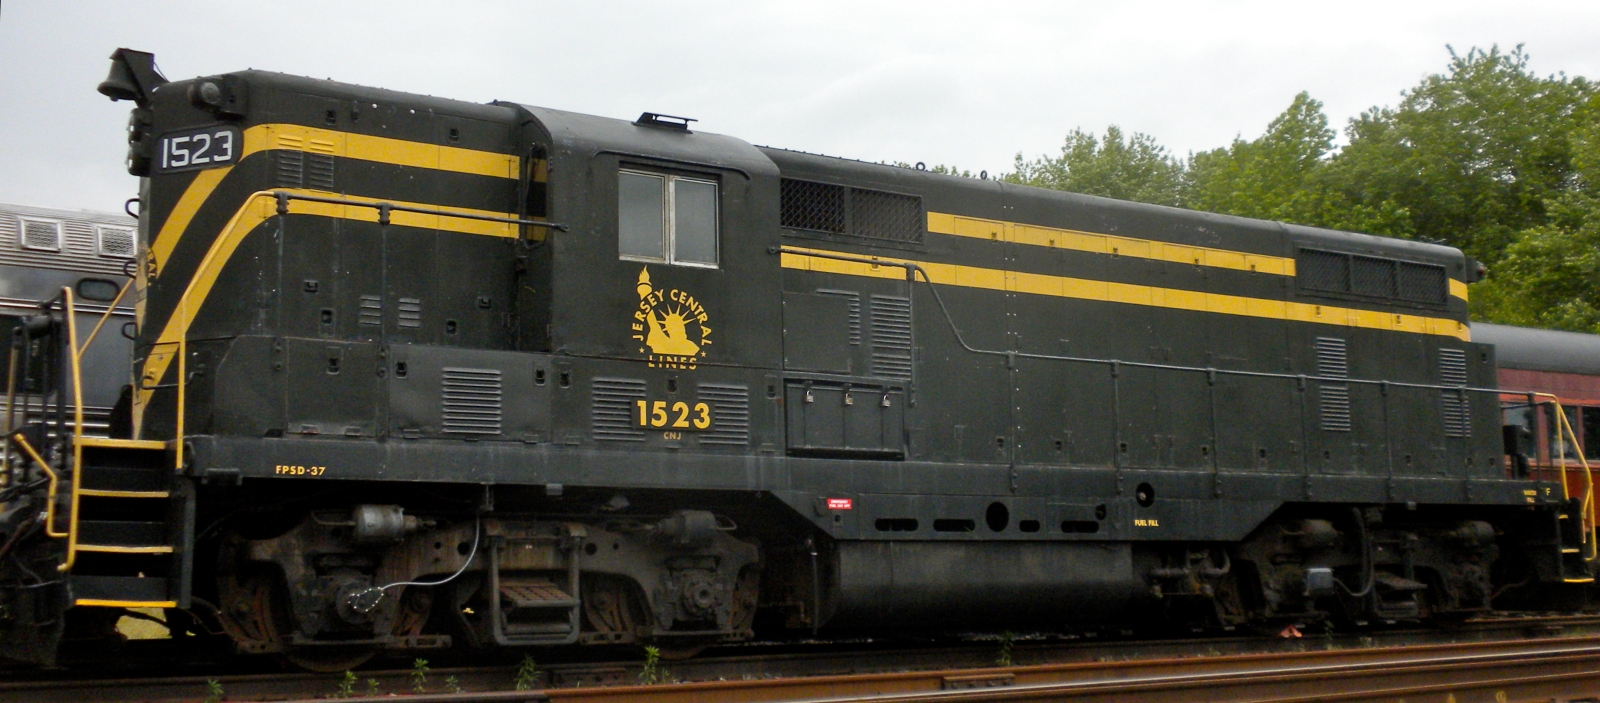 Jersey Central Lines GP7 No. 1523 in 2010 at Tuckahoe, New Jersey